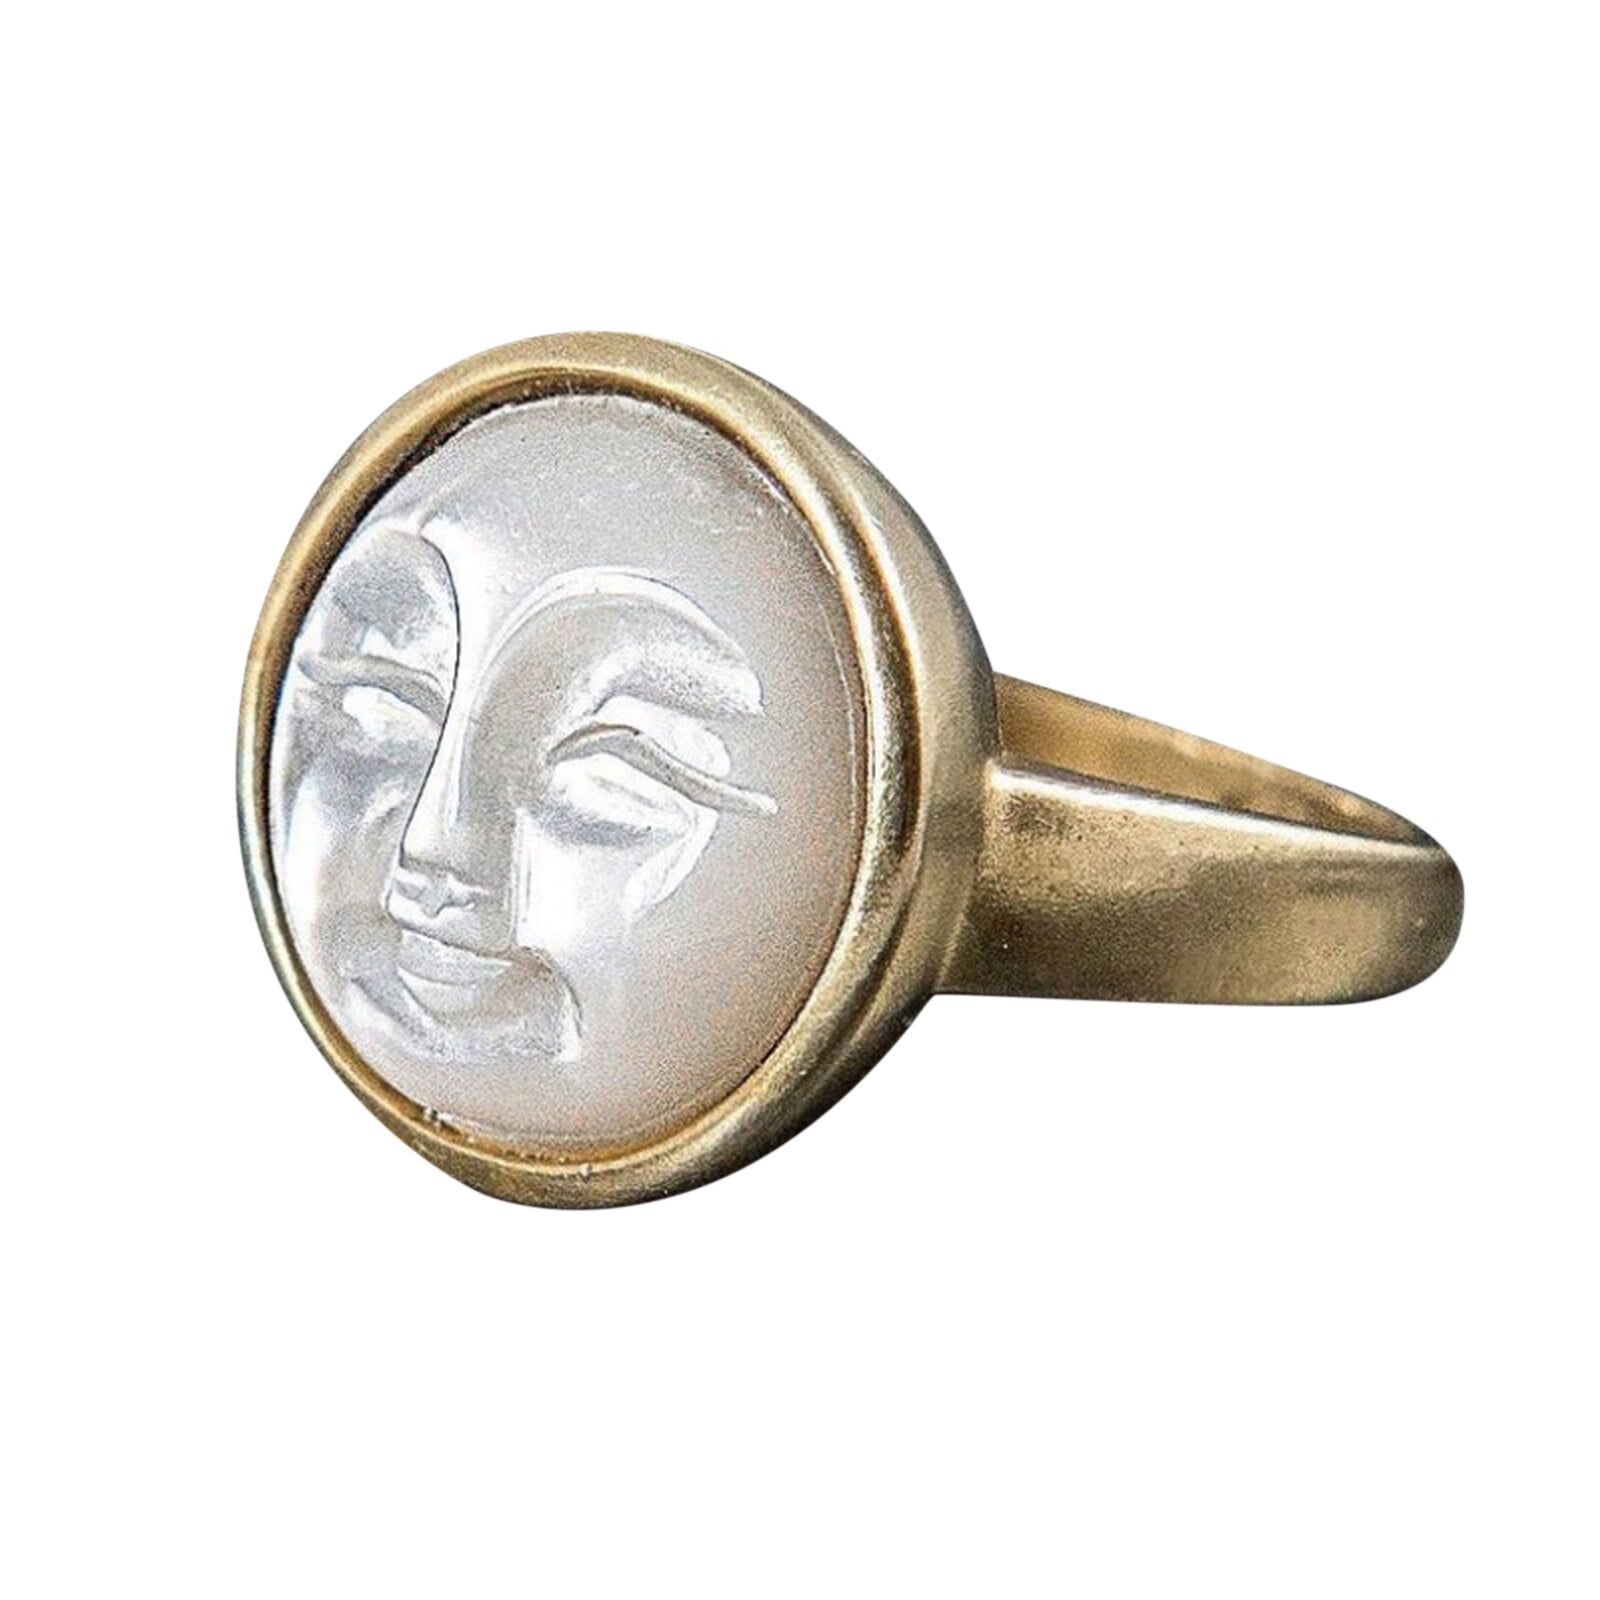 Moon Face Ring. Hand Casted Full Moon in Brass Gold Setting. 